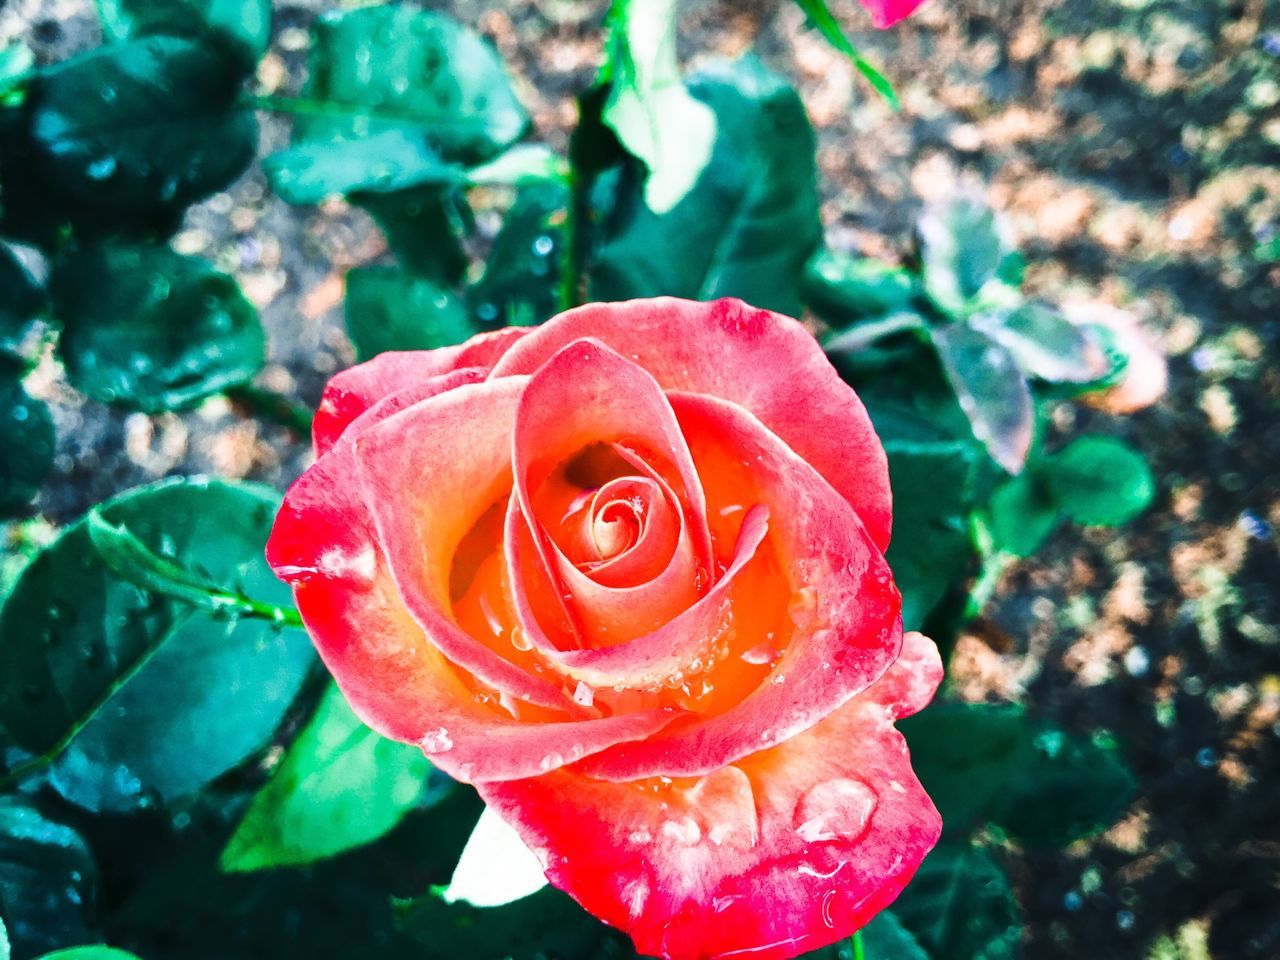 petal, flower, rose - flower, flower head, fragility, freshness, close-up, beauty in nature, single flower, blooming, rose, drop, focus on foreground, growth, single rose, wet, nature, red, in bloom, water